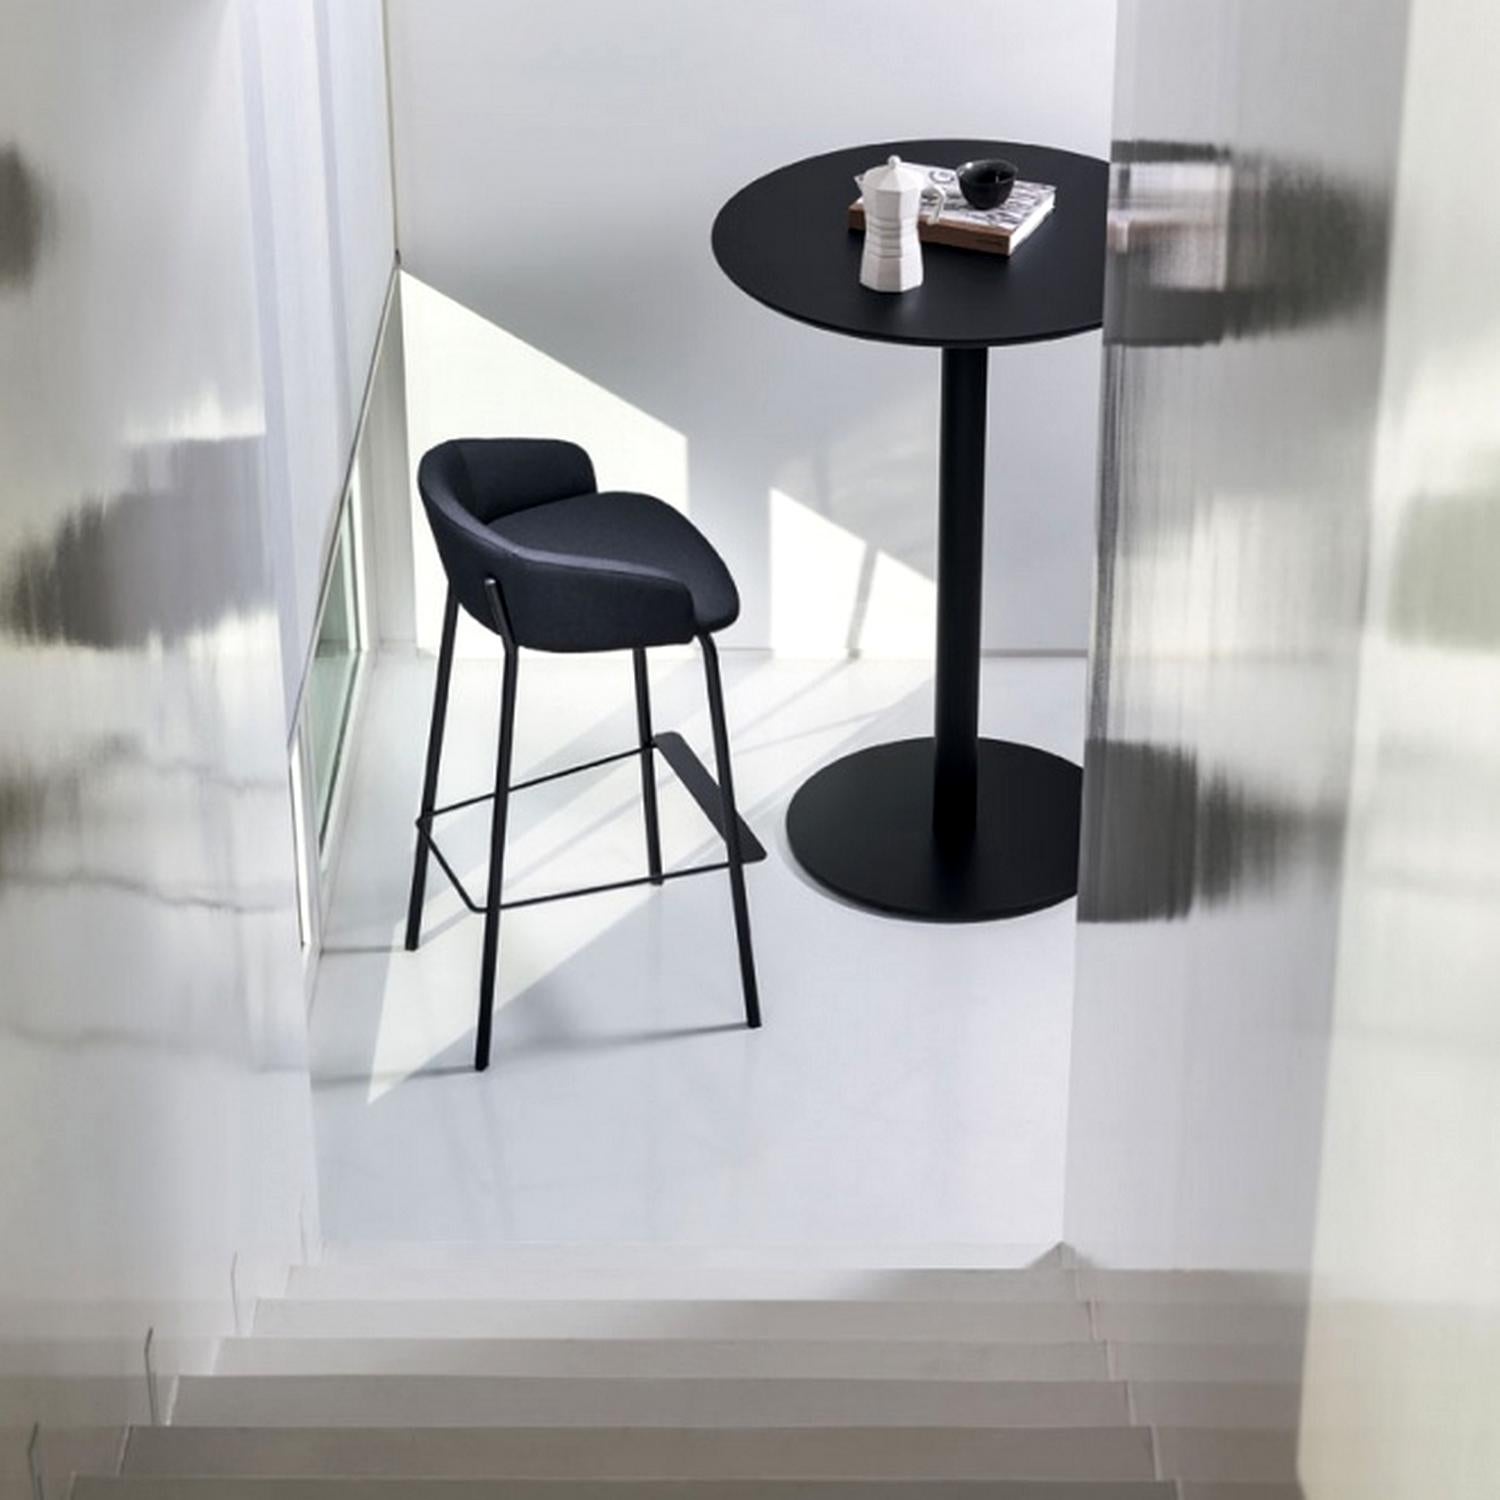 Metal In Stock in Los Angeles, Black Leather Counter Stool by Marco Zito